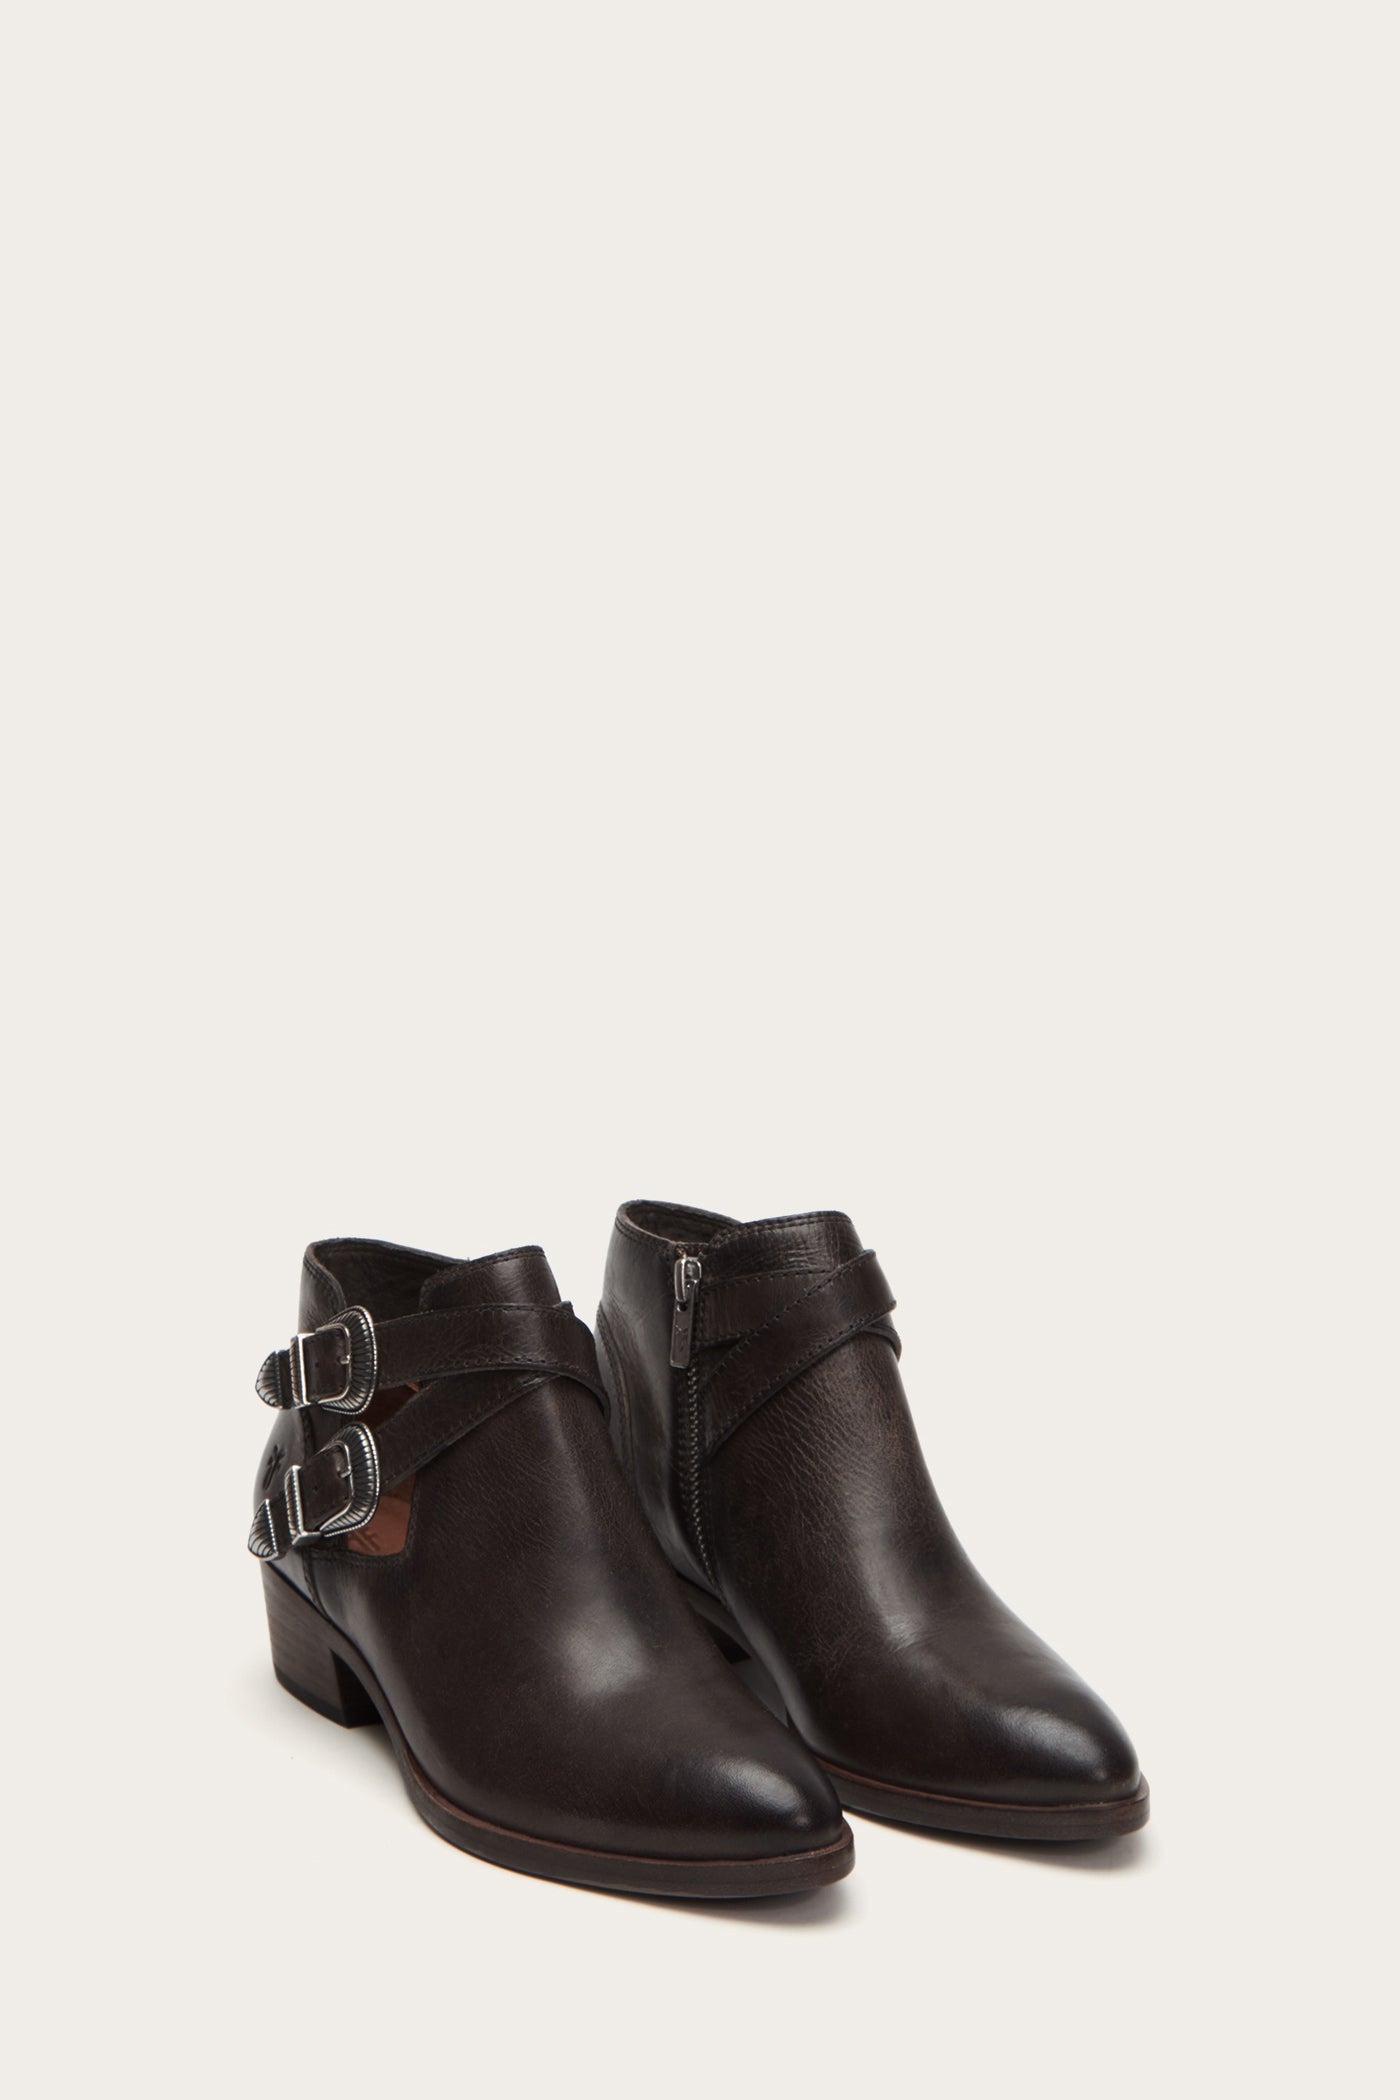 frye ray bootie